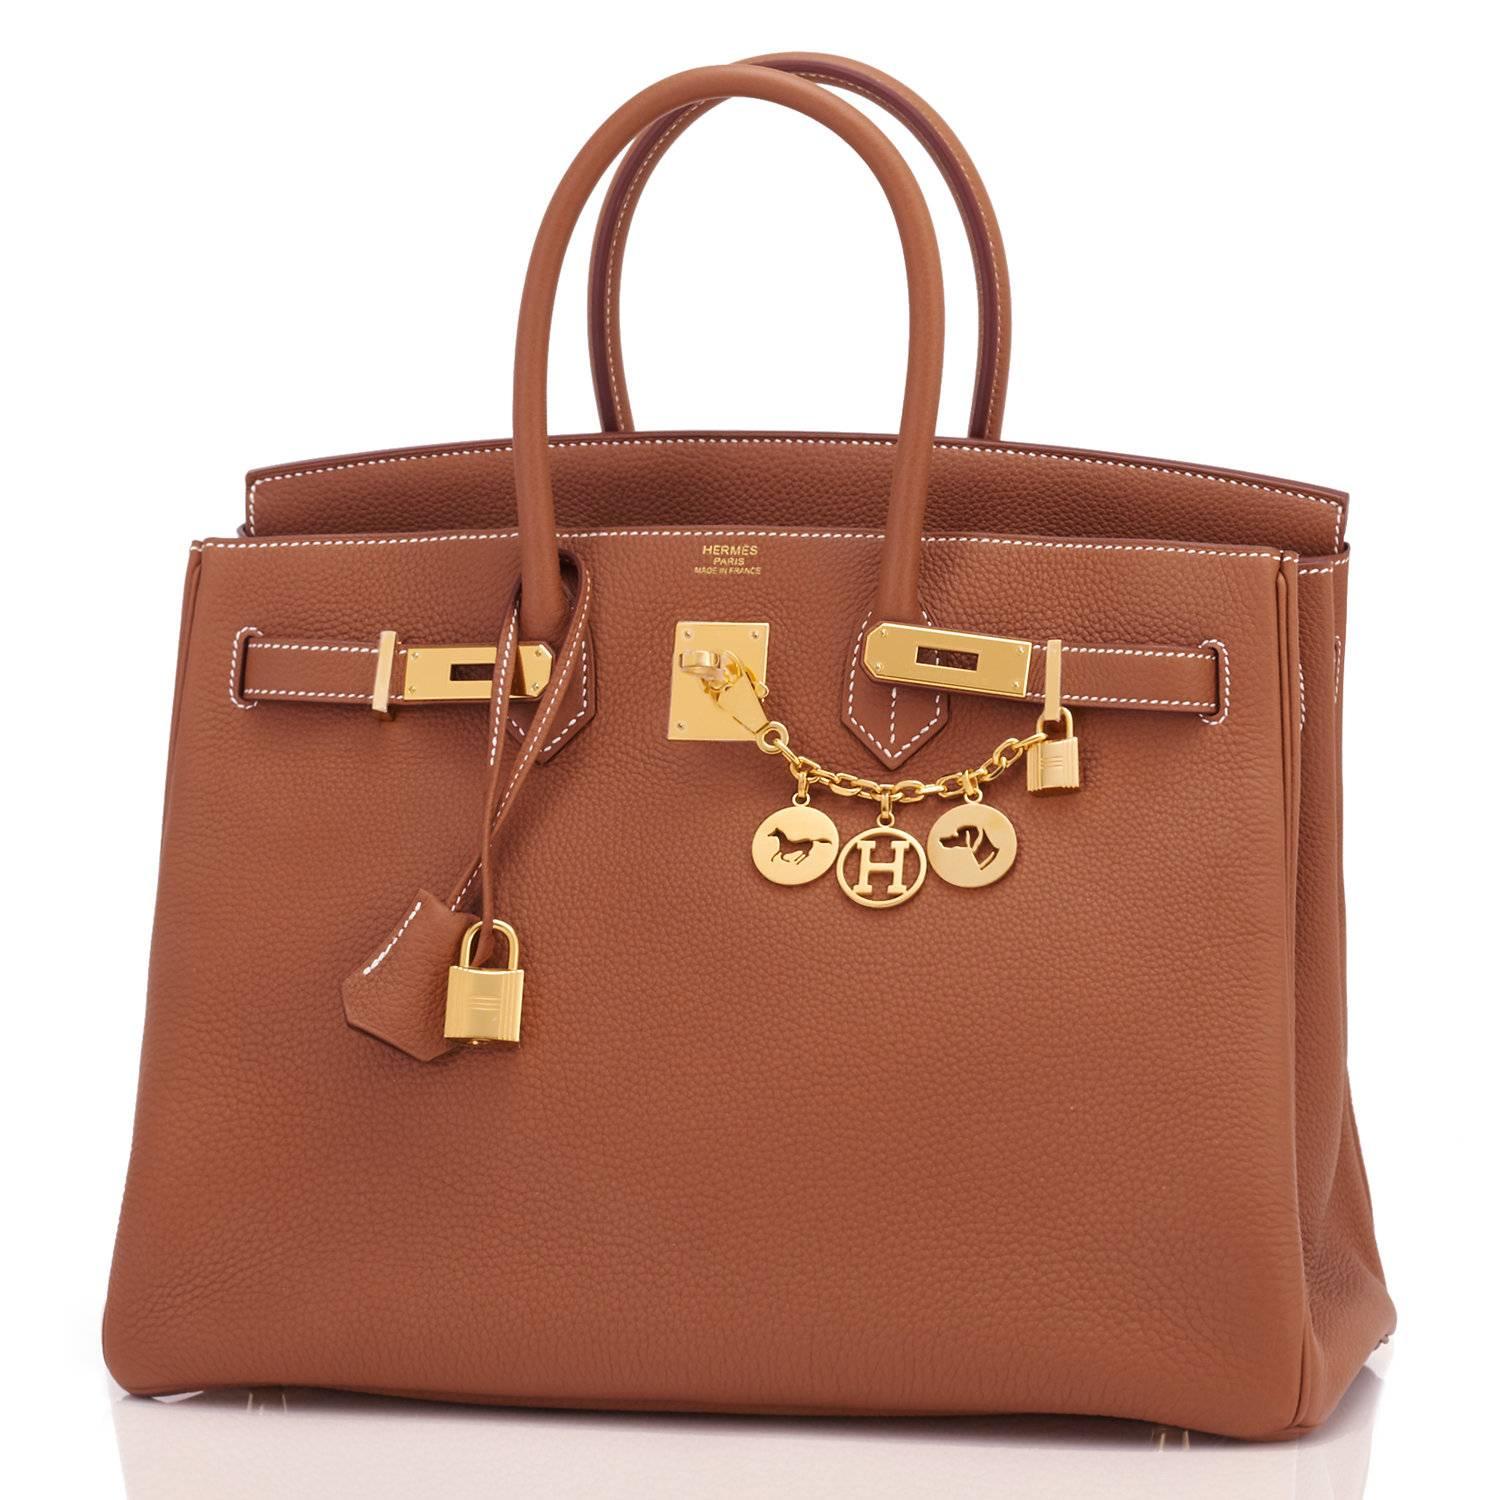 Hermes Gold Togo Camel Tan 35cm Birkin Gold Hardware Y Stamp, 2020
Just purchased from Hermes store; bag bears interior 2020 Y Stamp.
Brand New in Box. Store Fresh. Pristine Condition (with plastic on hardware). 
Perfect gift! Comes with lock, keys,